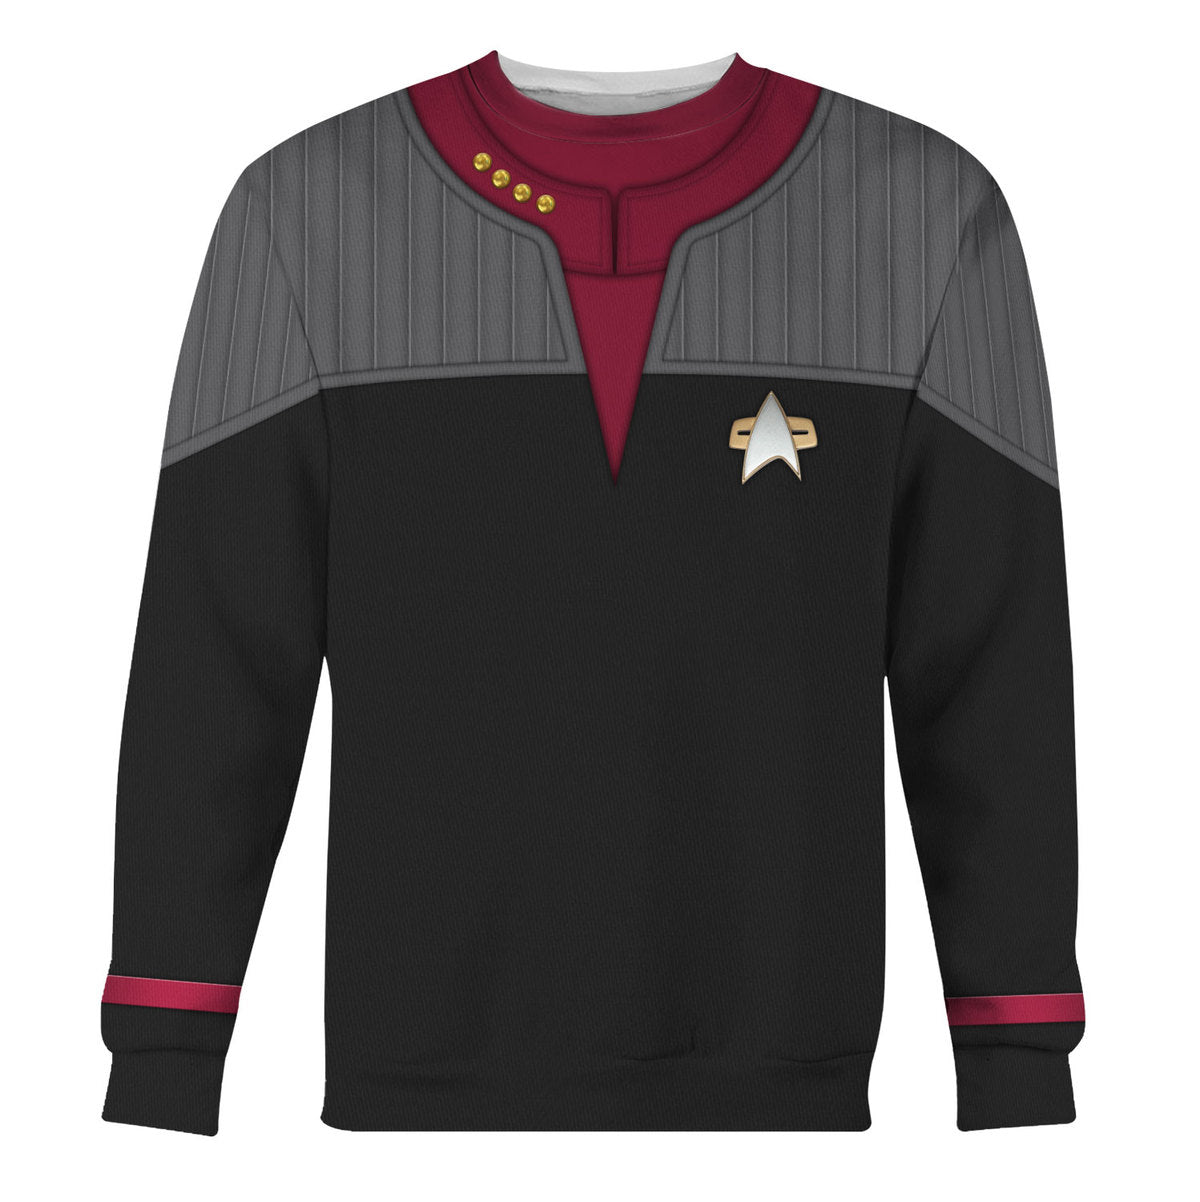 Star Trek Standard Uniform 2370s Command Division Cool - Sweater - Ugly Christmas Sweater